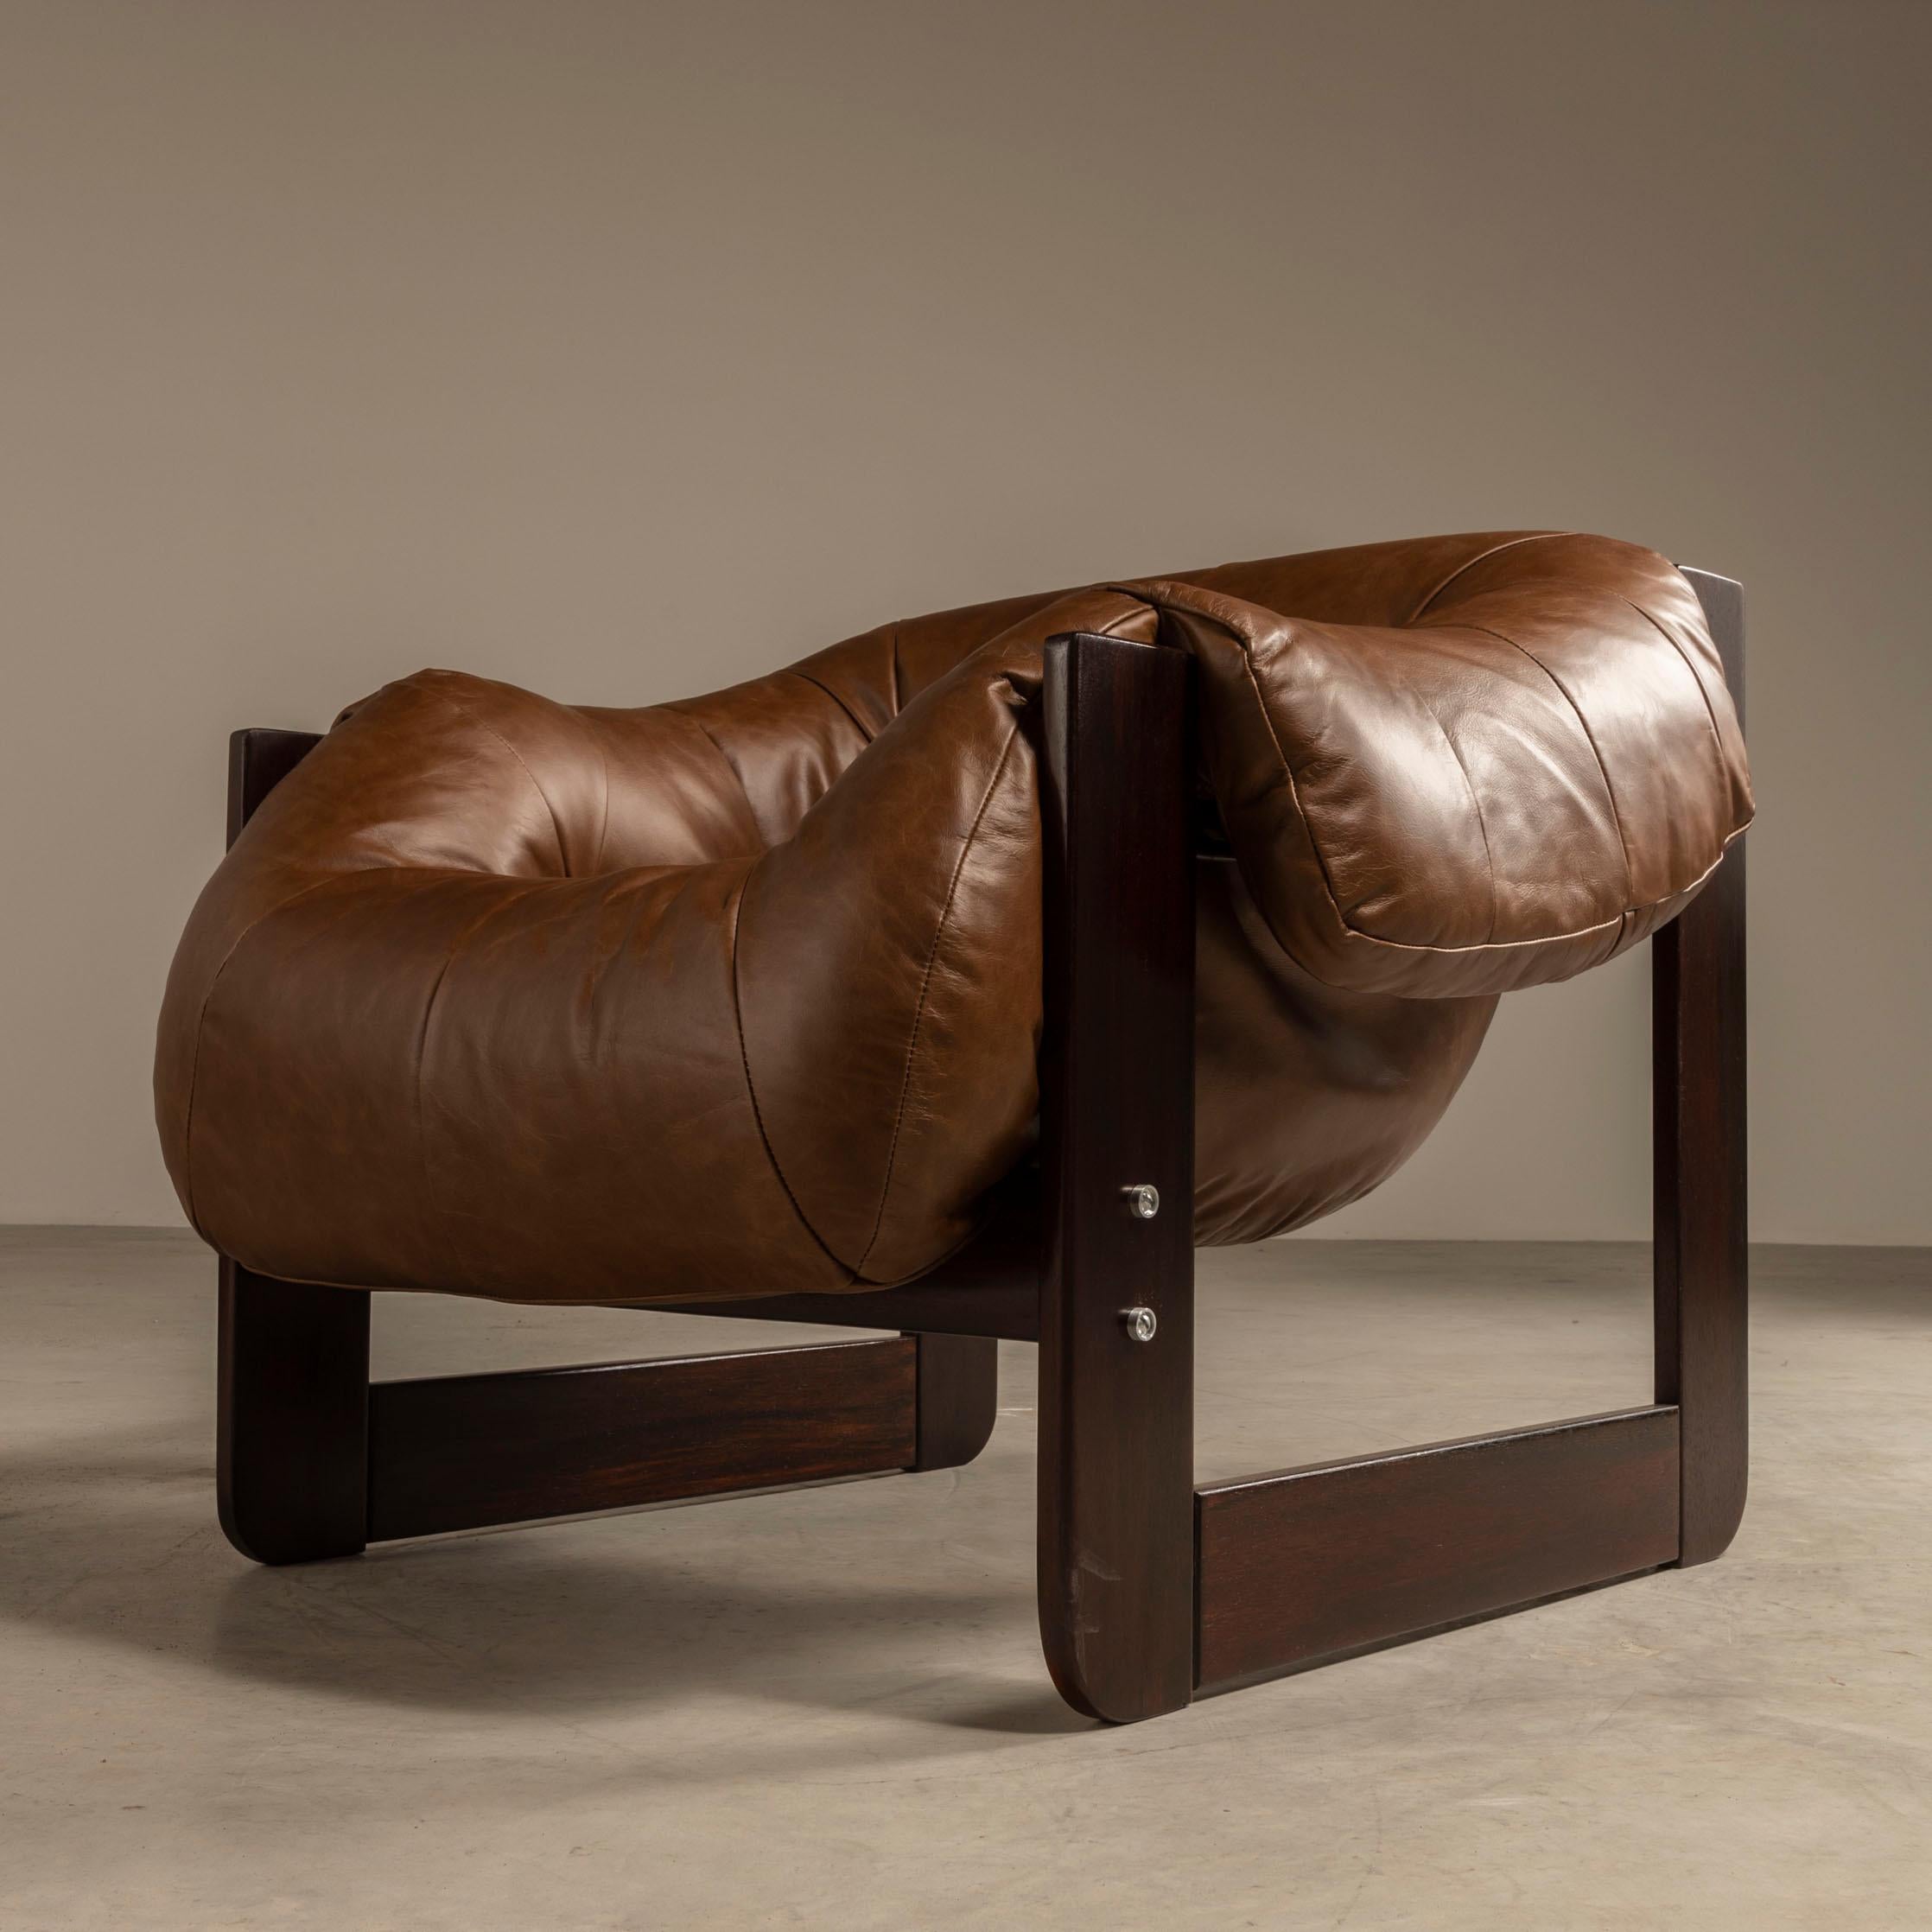 Leather Lounge Chair MP-97, by Percival Lafer, Brazilian Mid-Century Modern Design